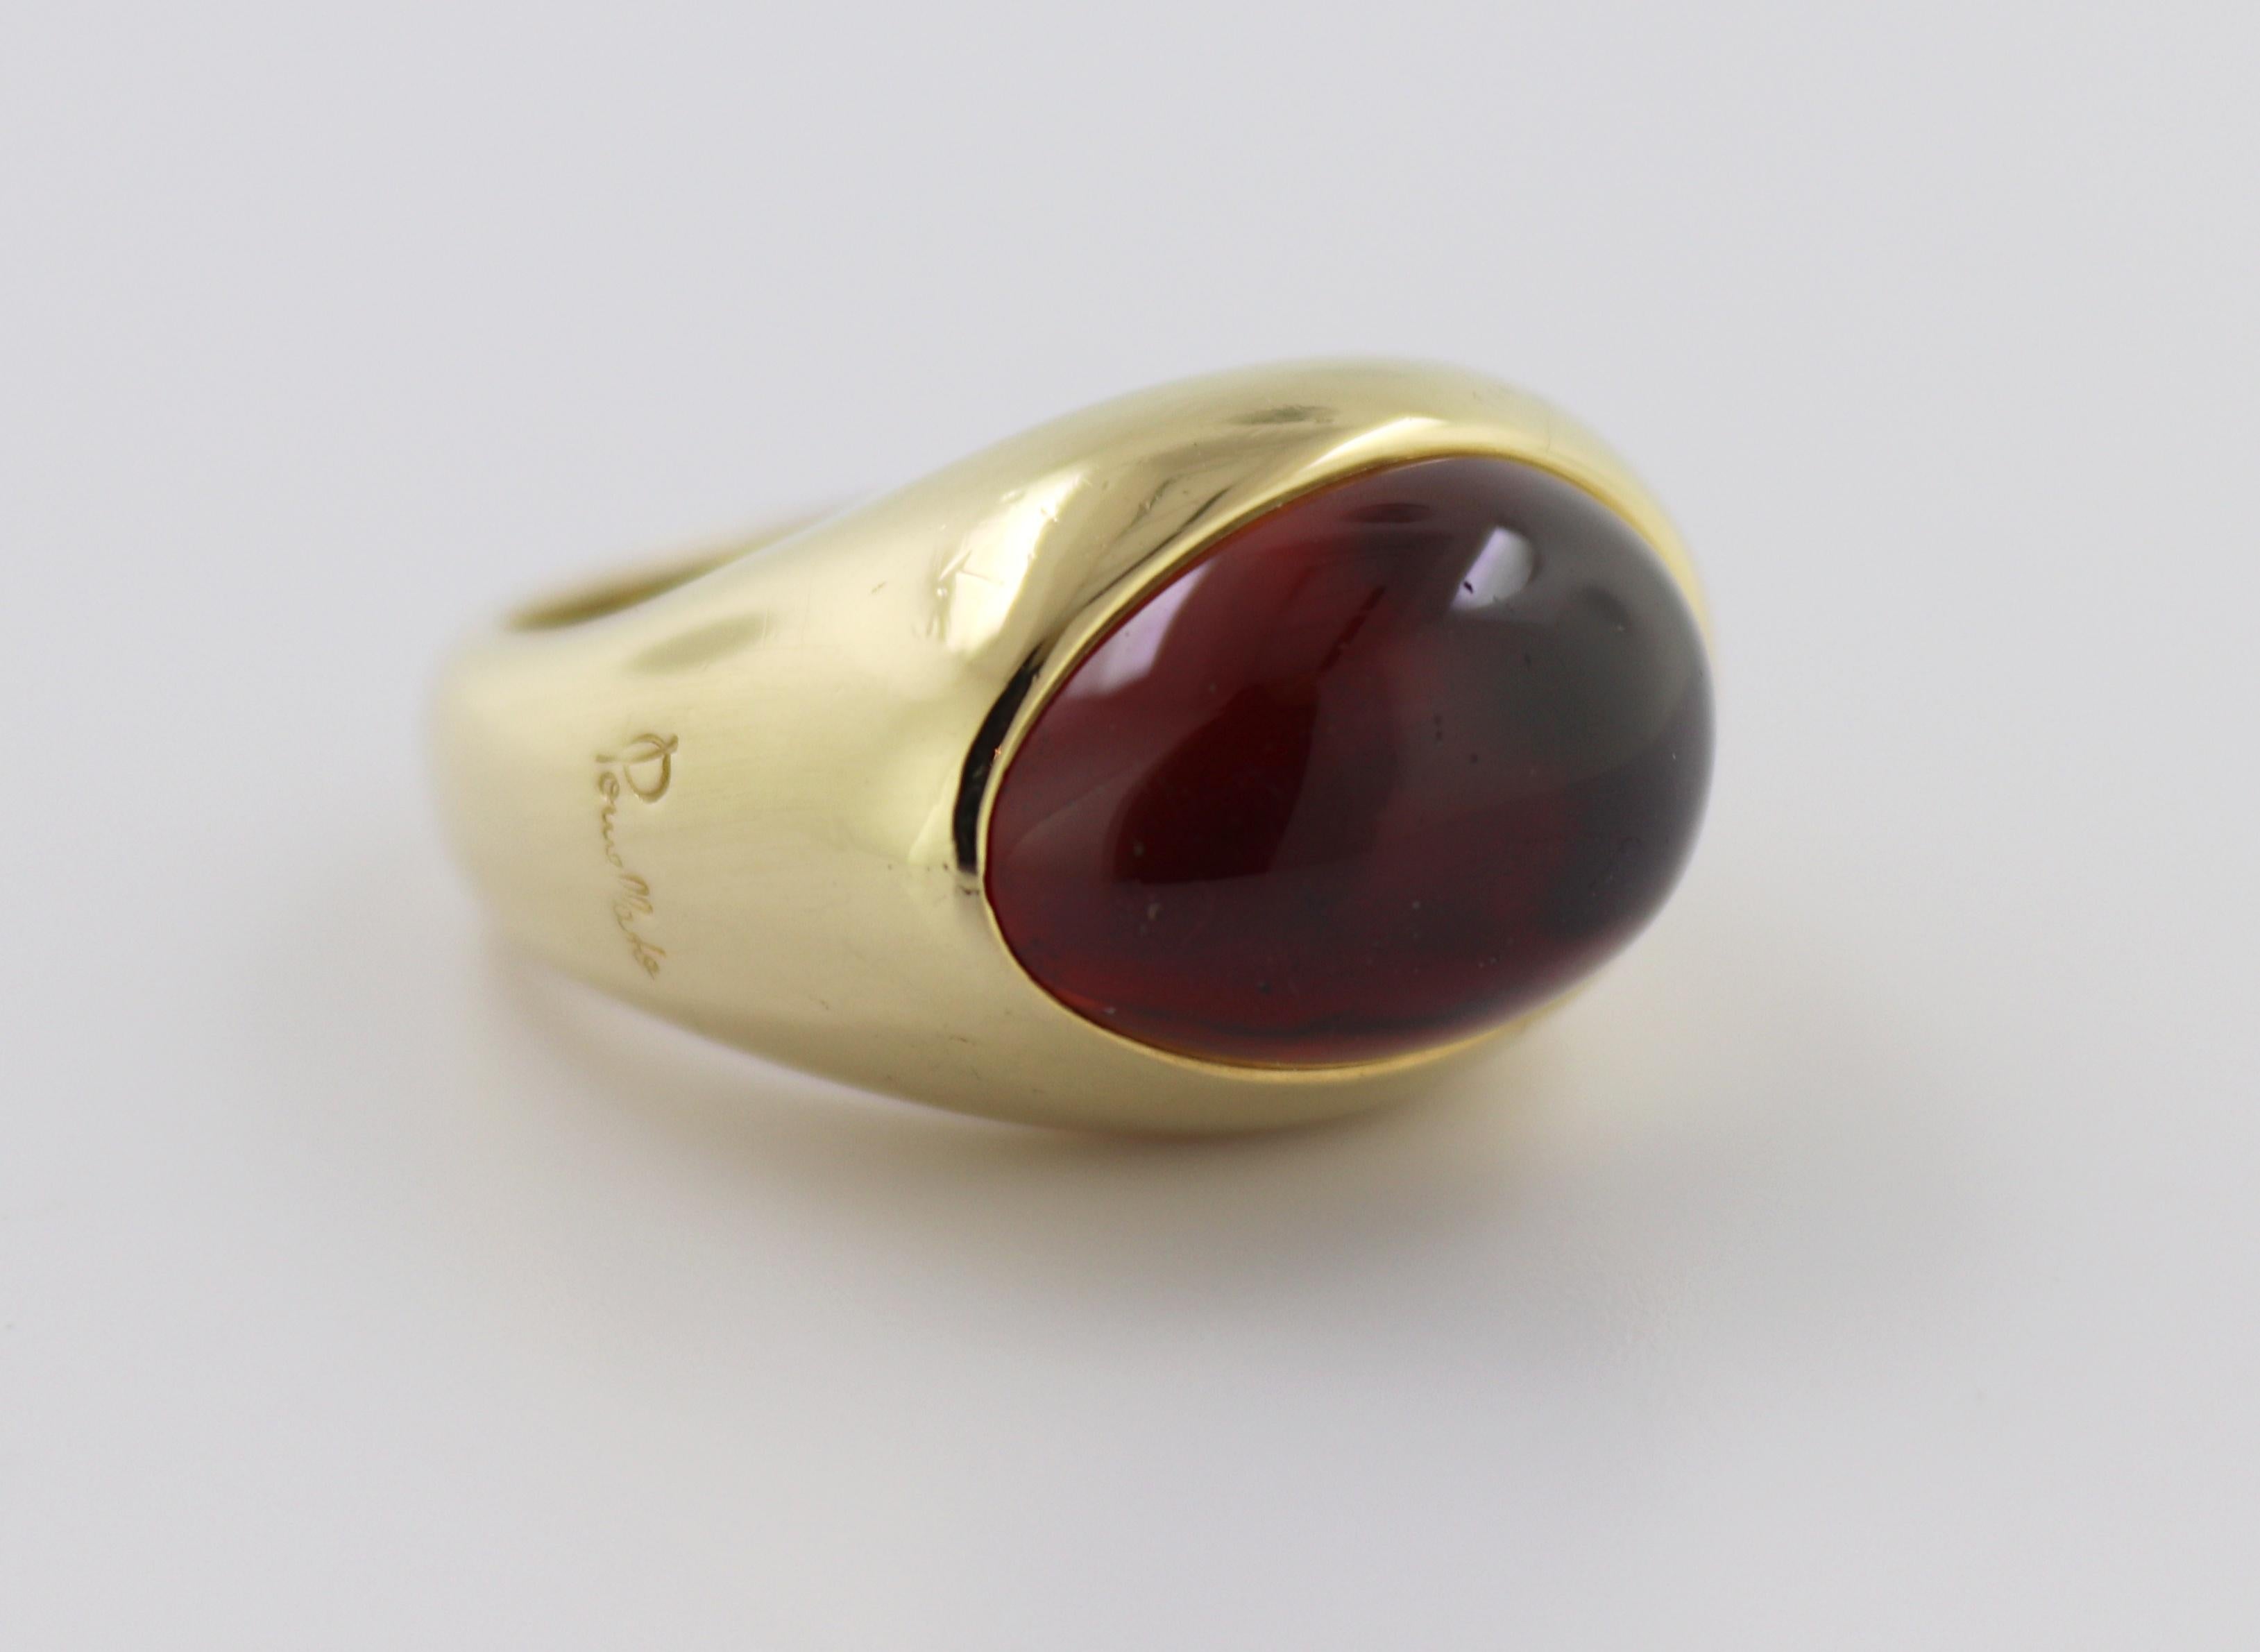 Featuring (1) Pear garnet cabochon, 15 X 9.9 X 4.0 mm (concaved back), set in an 18k yellow gold
mounting, 13.9 mm tapering to 4.6 mm, size 6.5, Gross weight 15.81 grams.